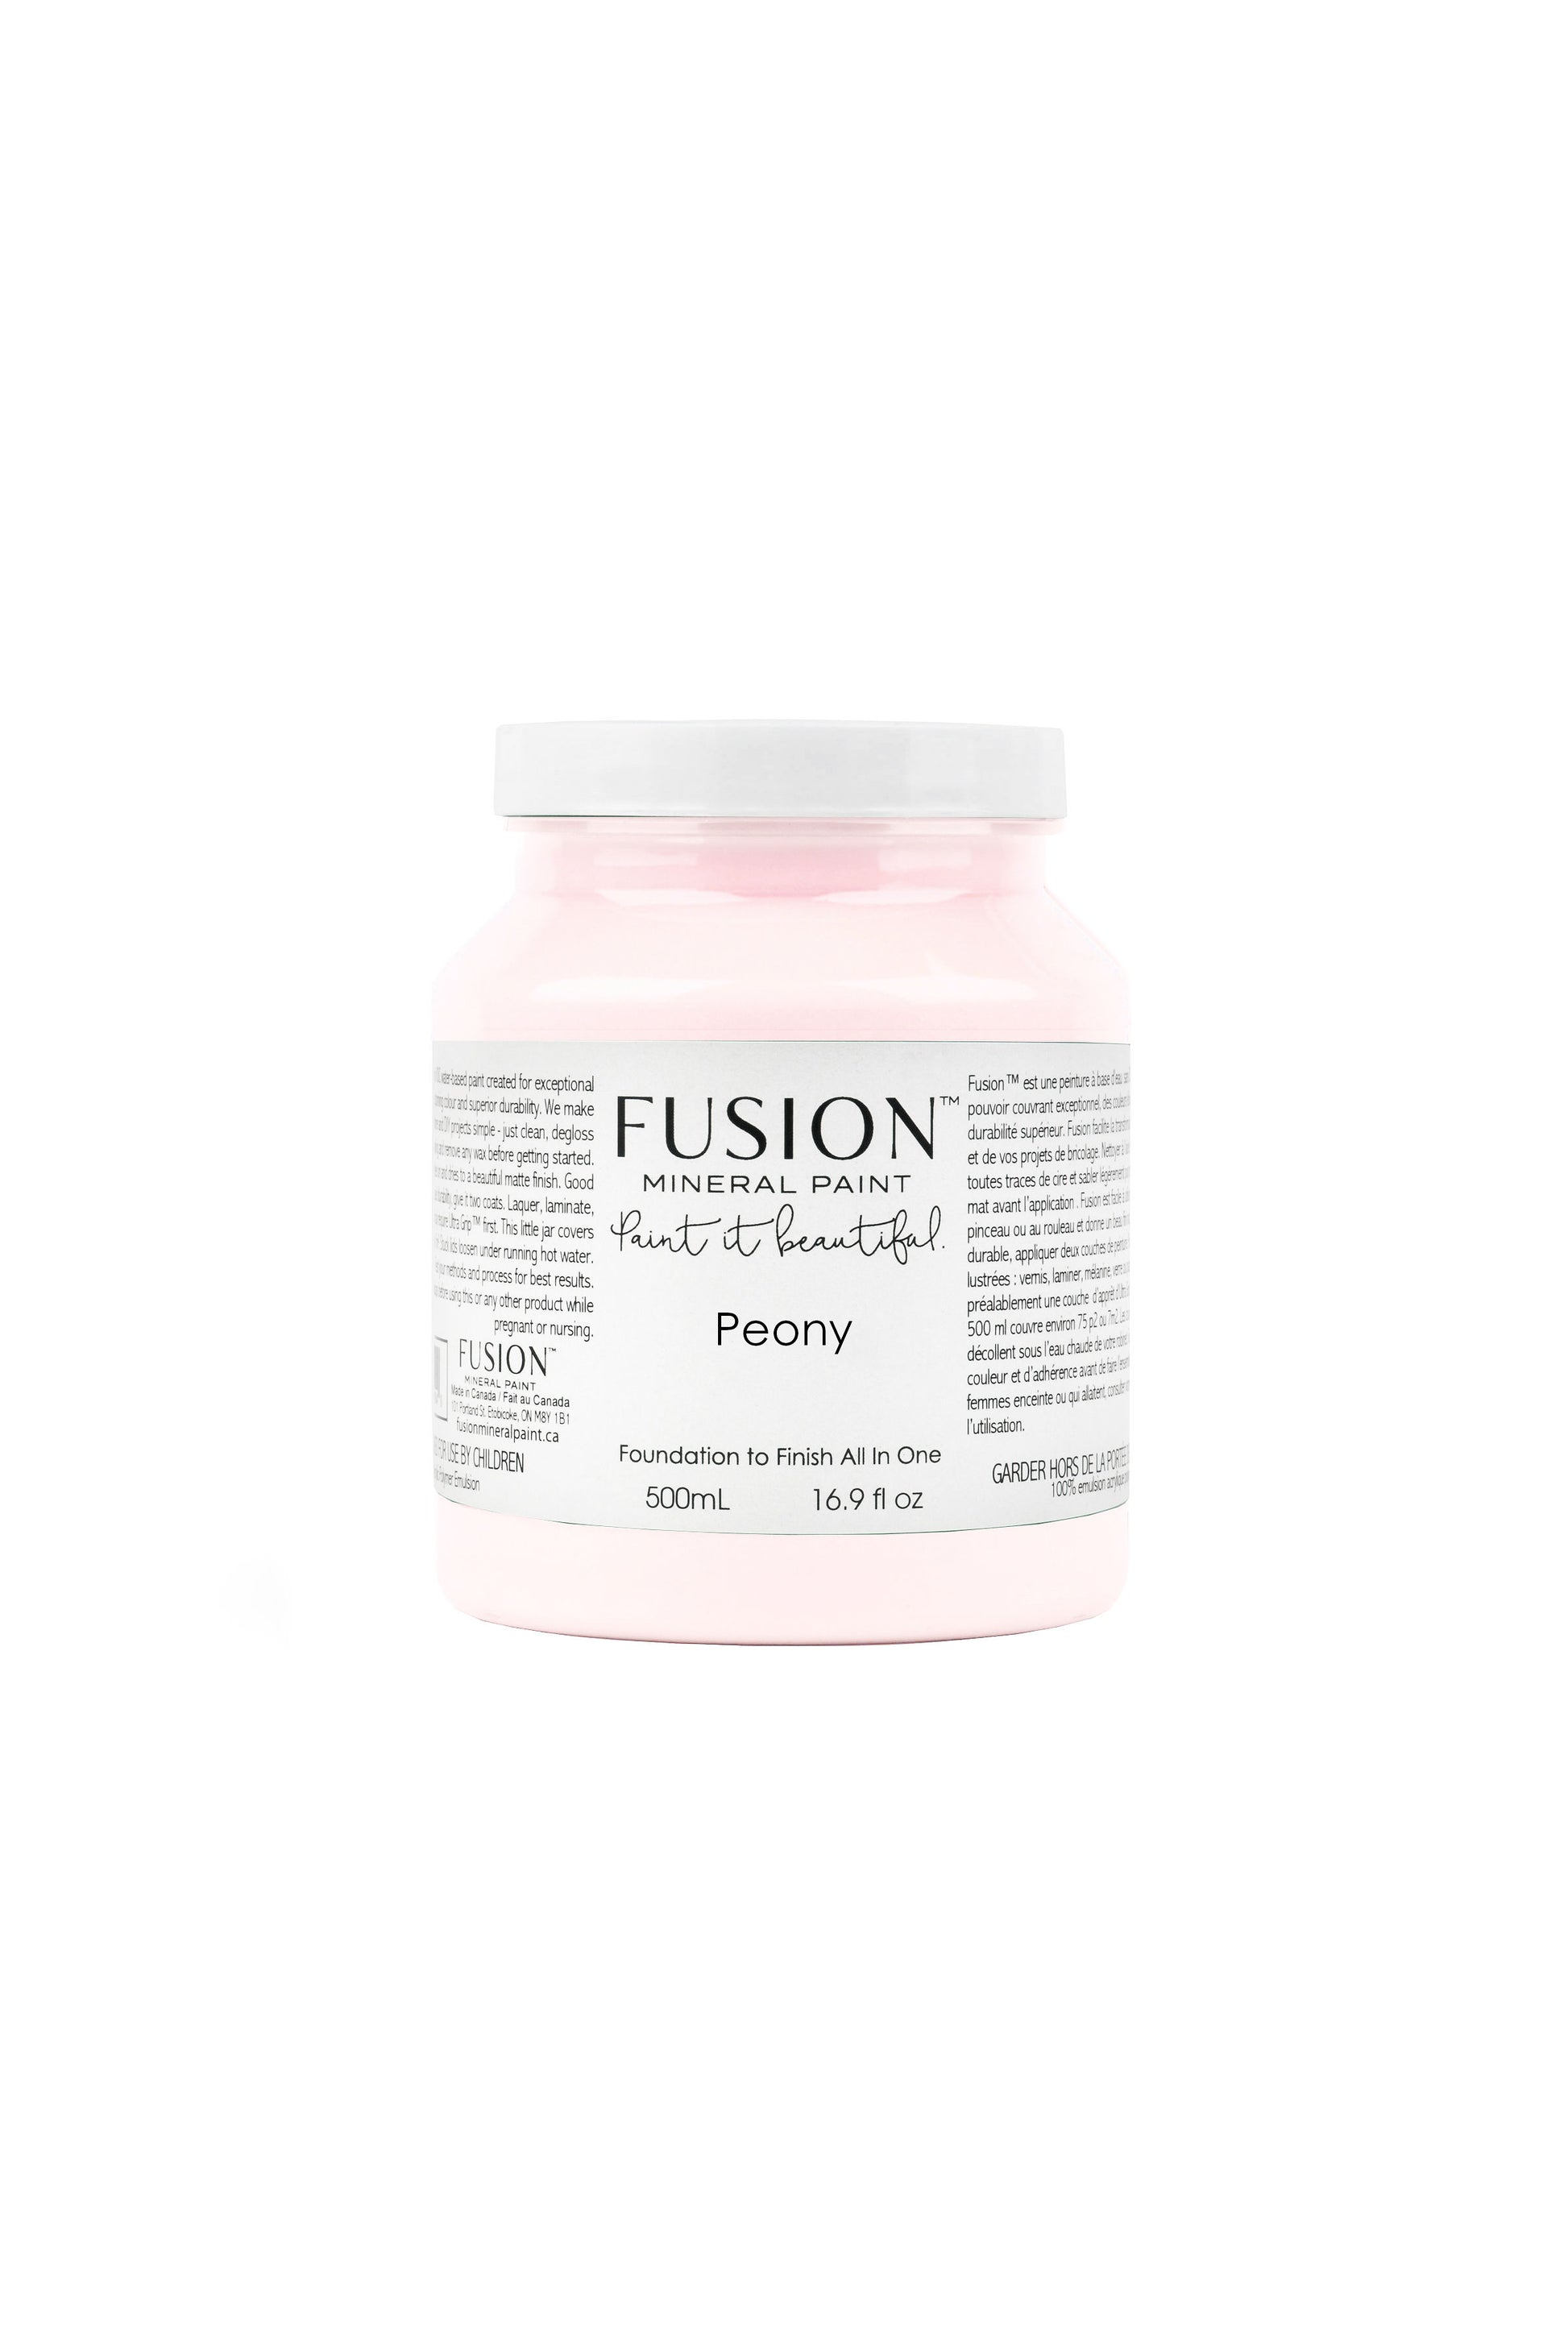 Peony Fusion Mineral Paint, Blush Pink Paint Color| 500ml Pint Size